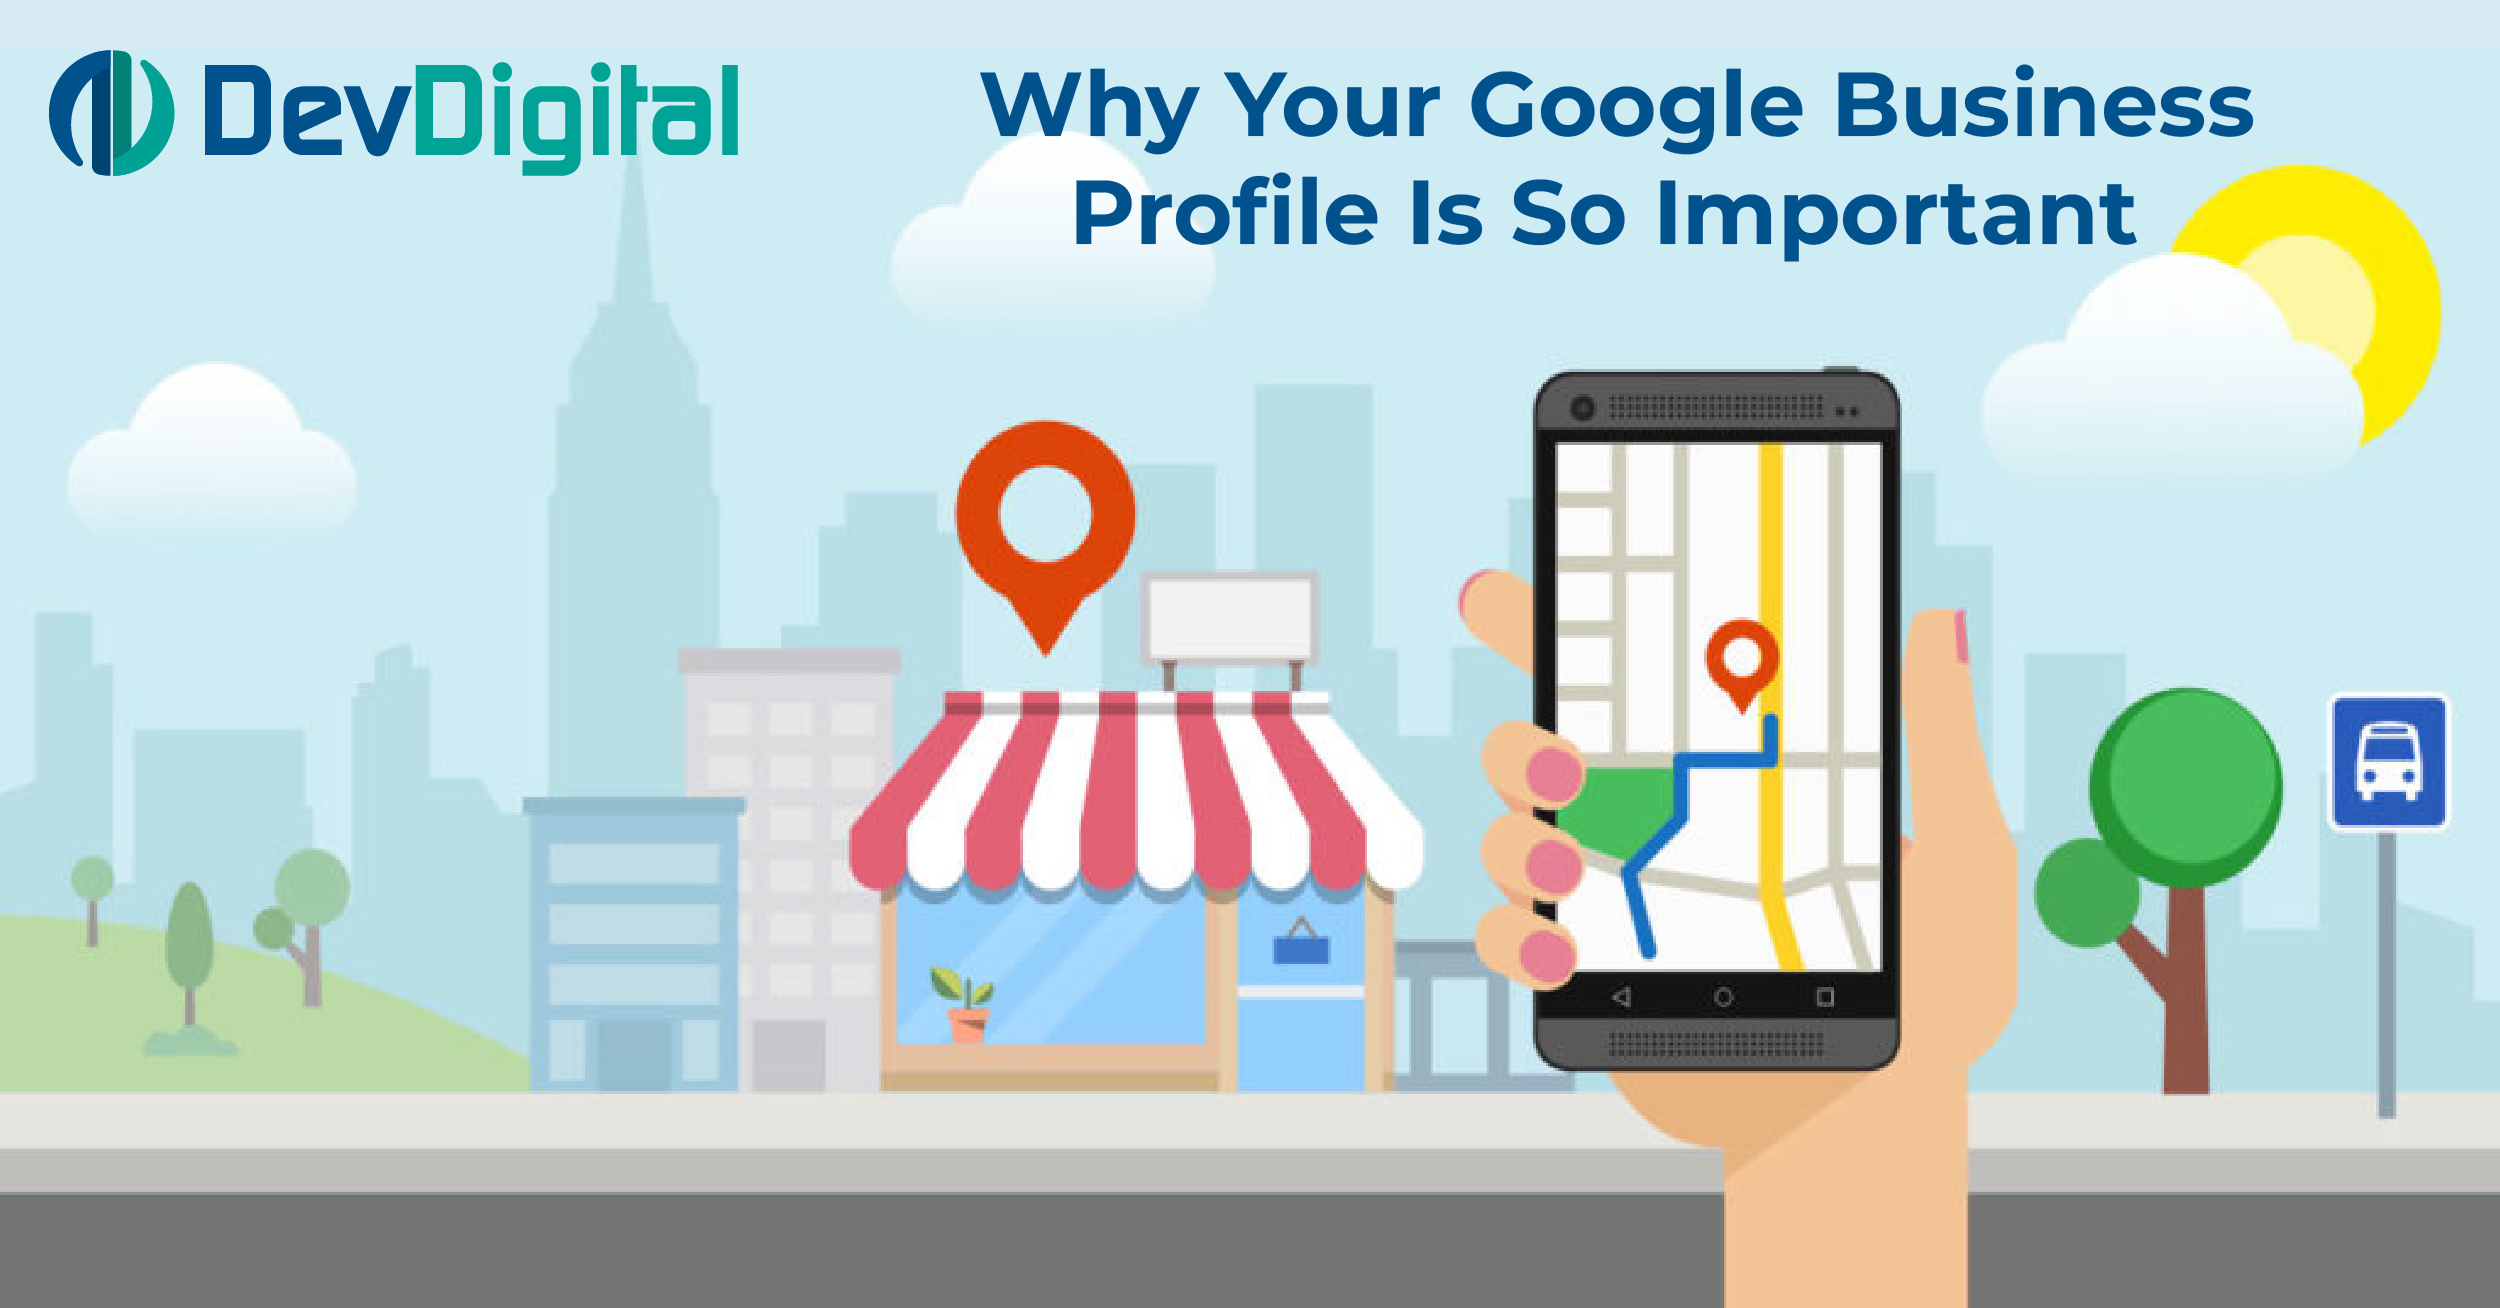 Why Your Google Business Profile Is So Important